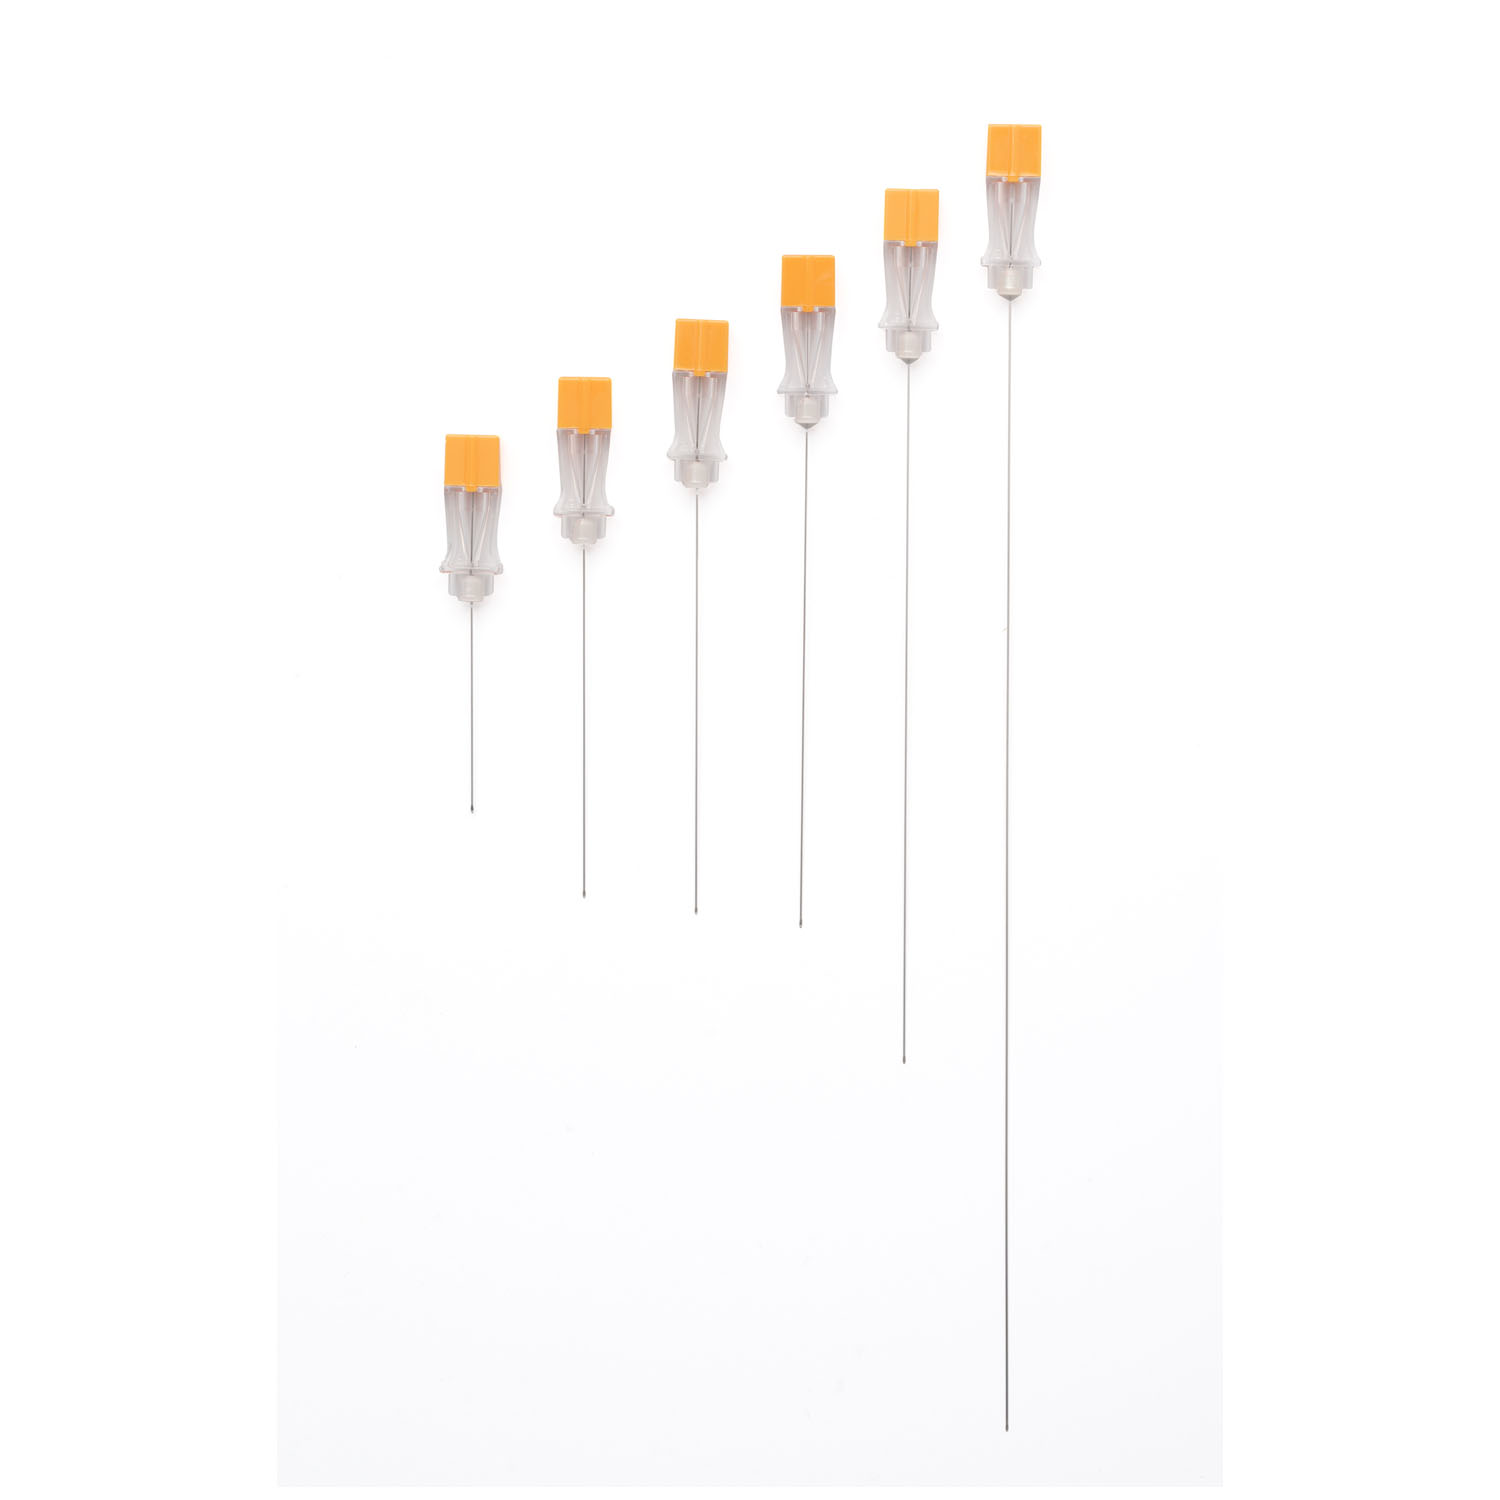 MYCO RELI QUINCKE POINT SPINAL NEEDLES : SN25G351 BX $44.59 Stocked